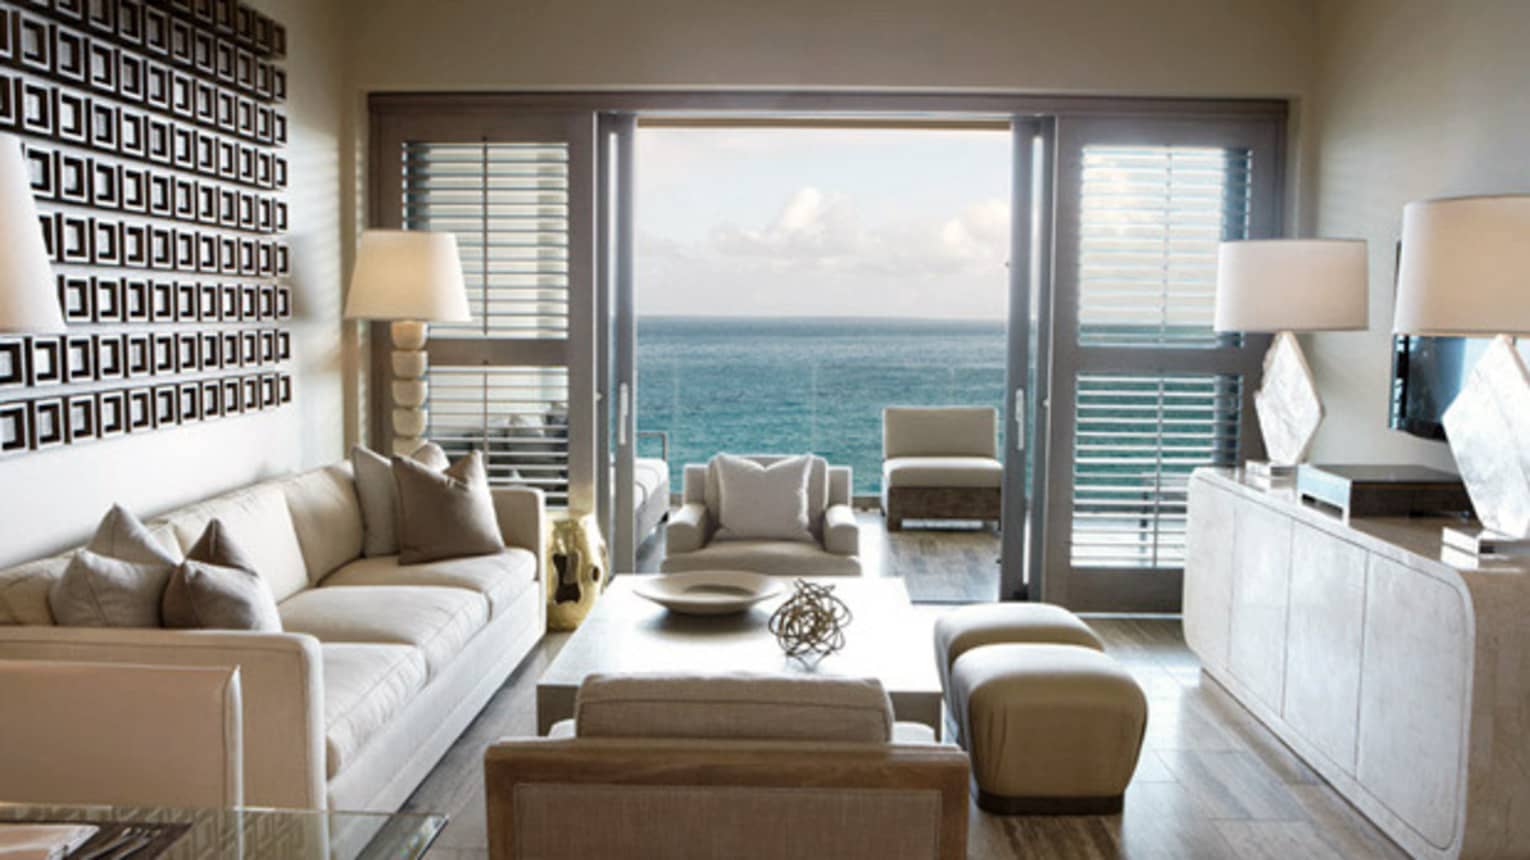 One-Bedroom Ocean-View Suite living room with white sofa and armchairs, patio door with ocean view